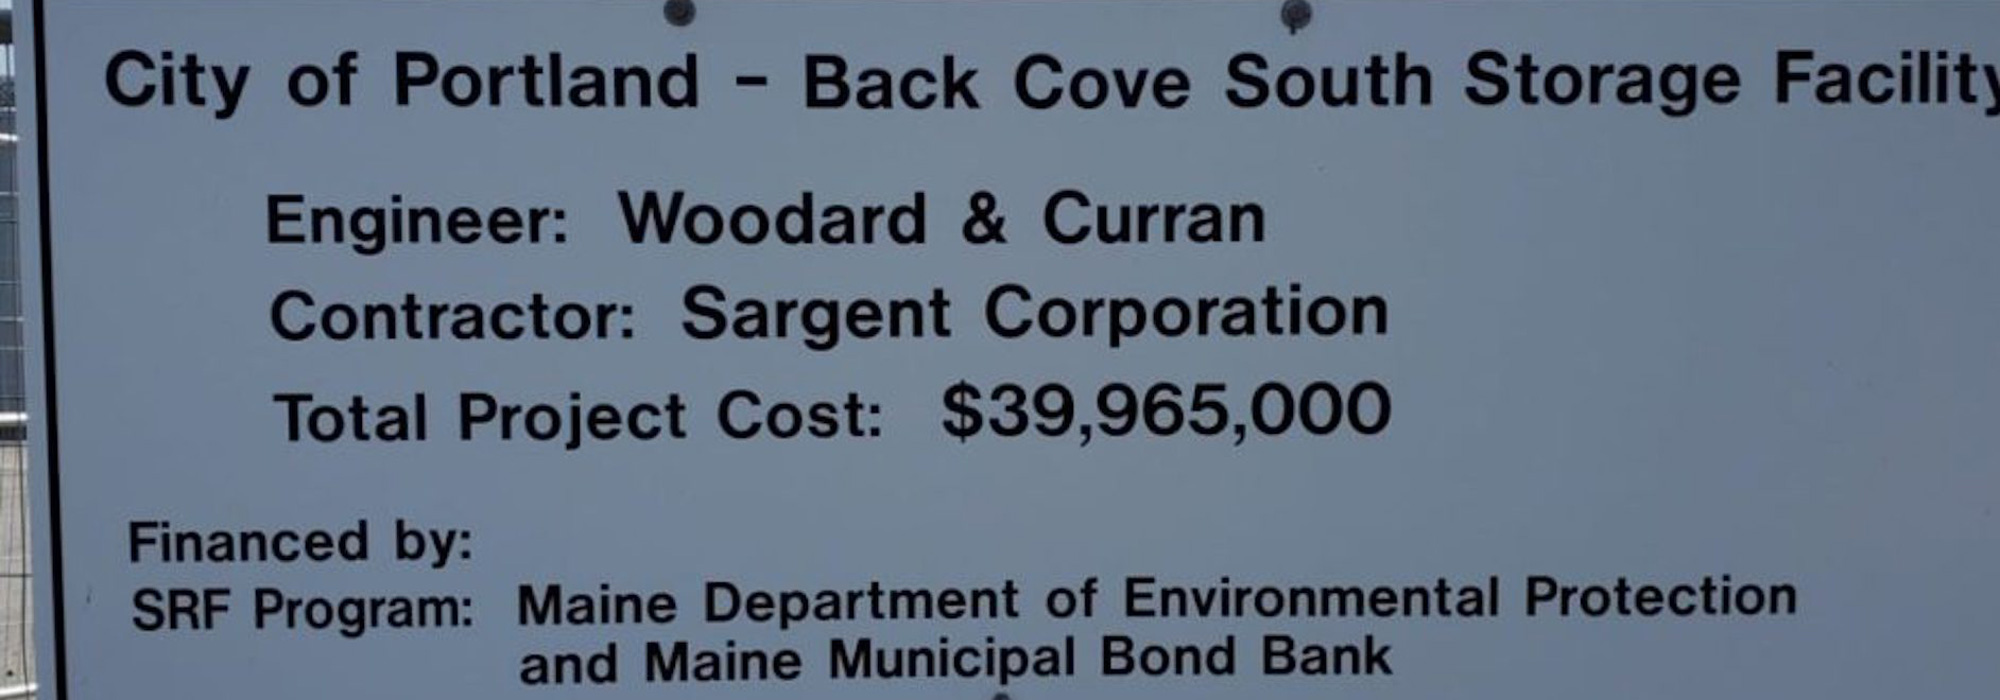 Sargent's Subject Cost For Maine Department Of Environment